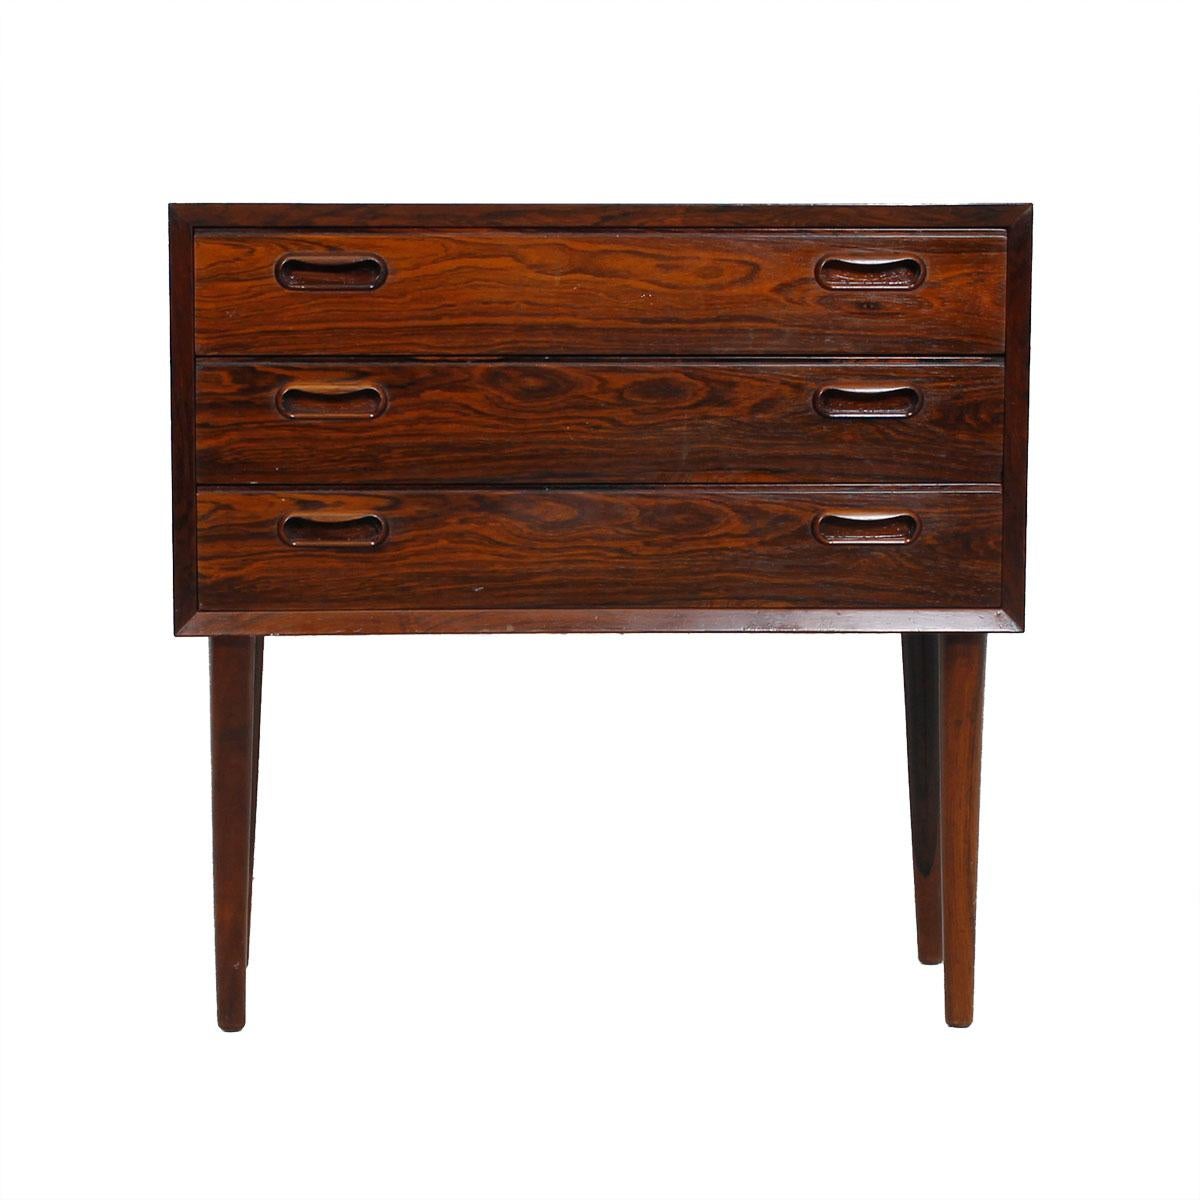 Pair of Petite Danish Rosewood 3 Drawer Nightstands / End-Tables

Additional information:
Material: Rosewood
The Minimalist Danish Modern design of this chest of drawers allows the luxurious rosewood to take center stage. The case, with three